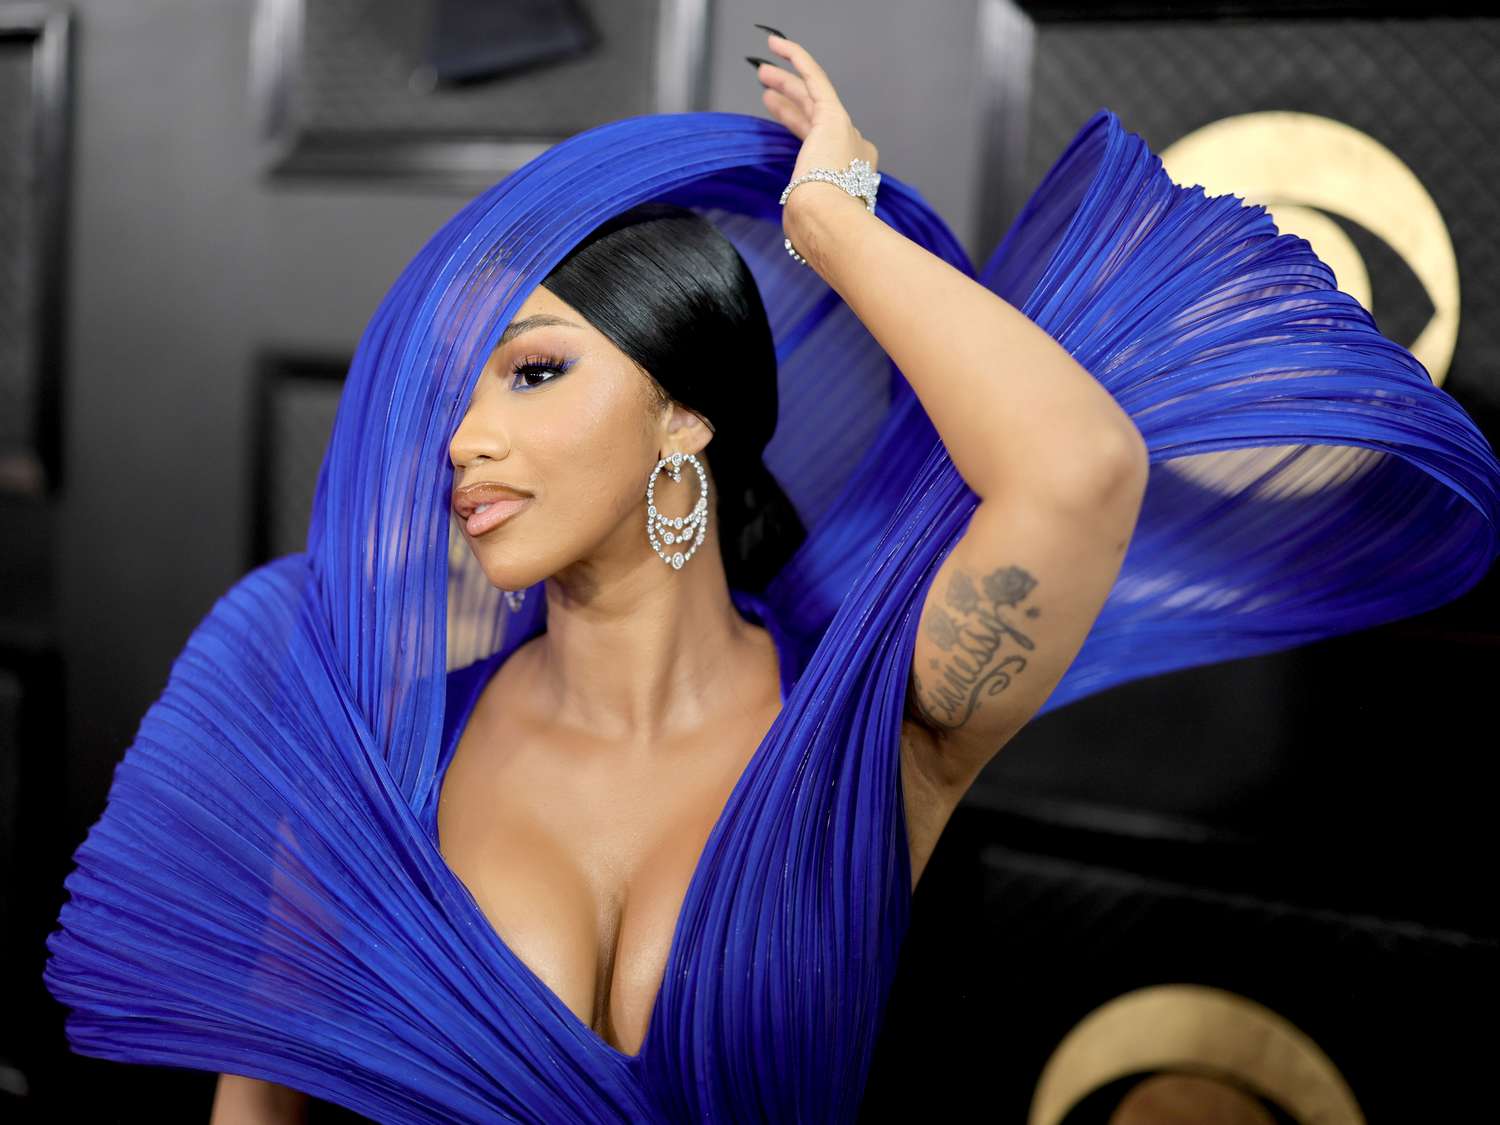 dave henrichs recommends cardi b up skirt pic